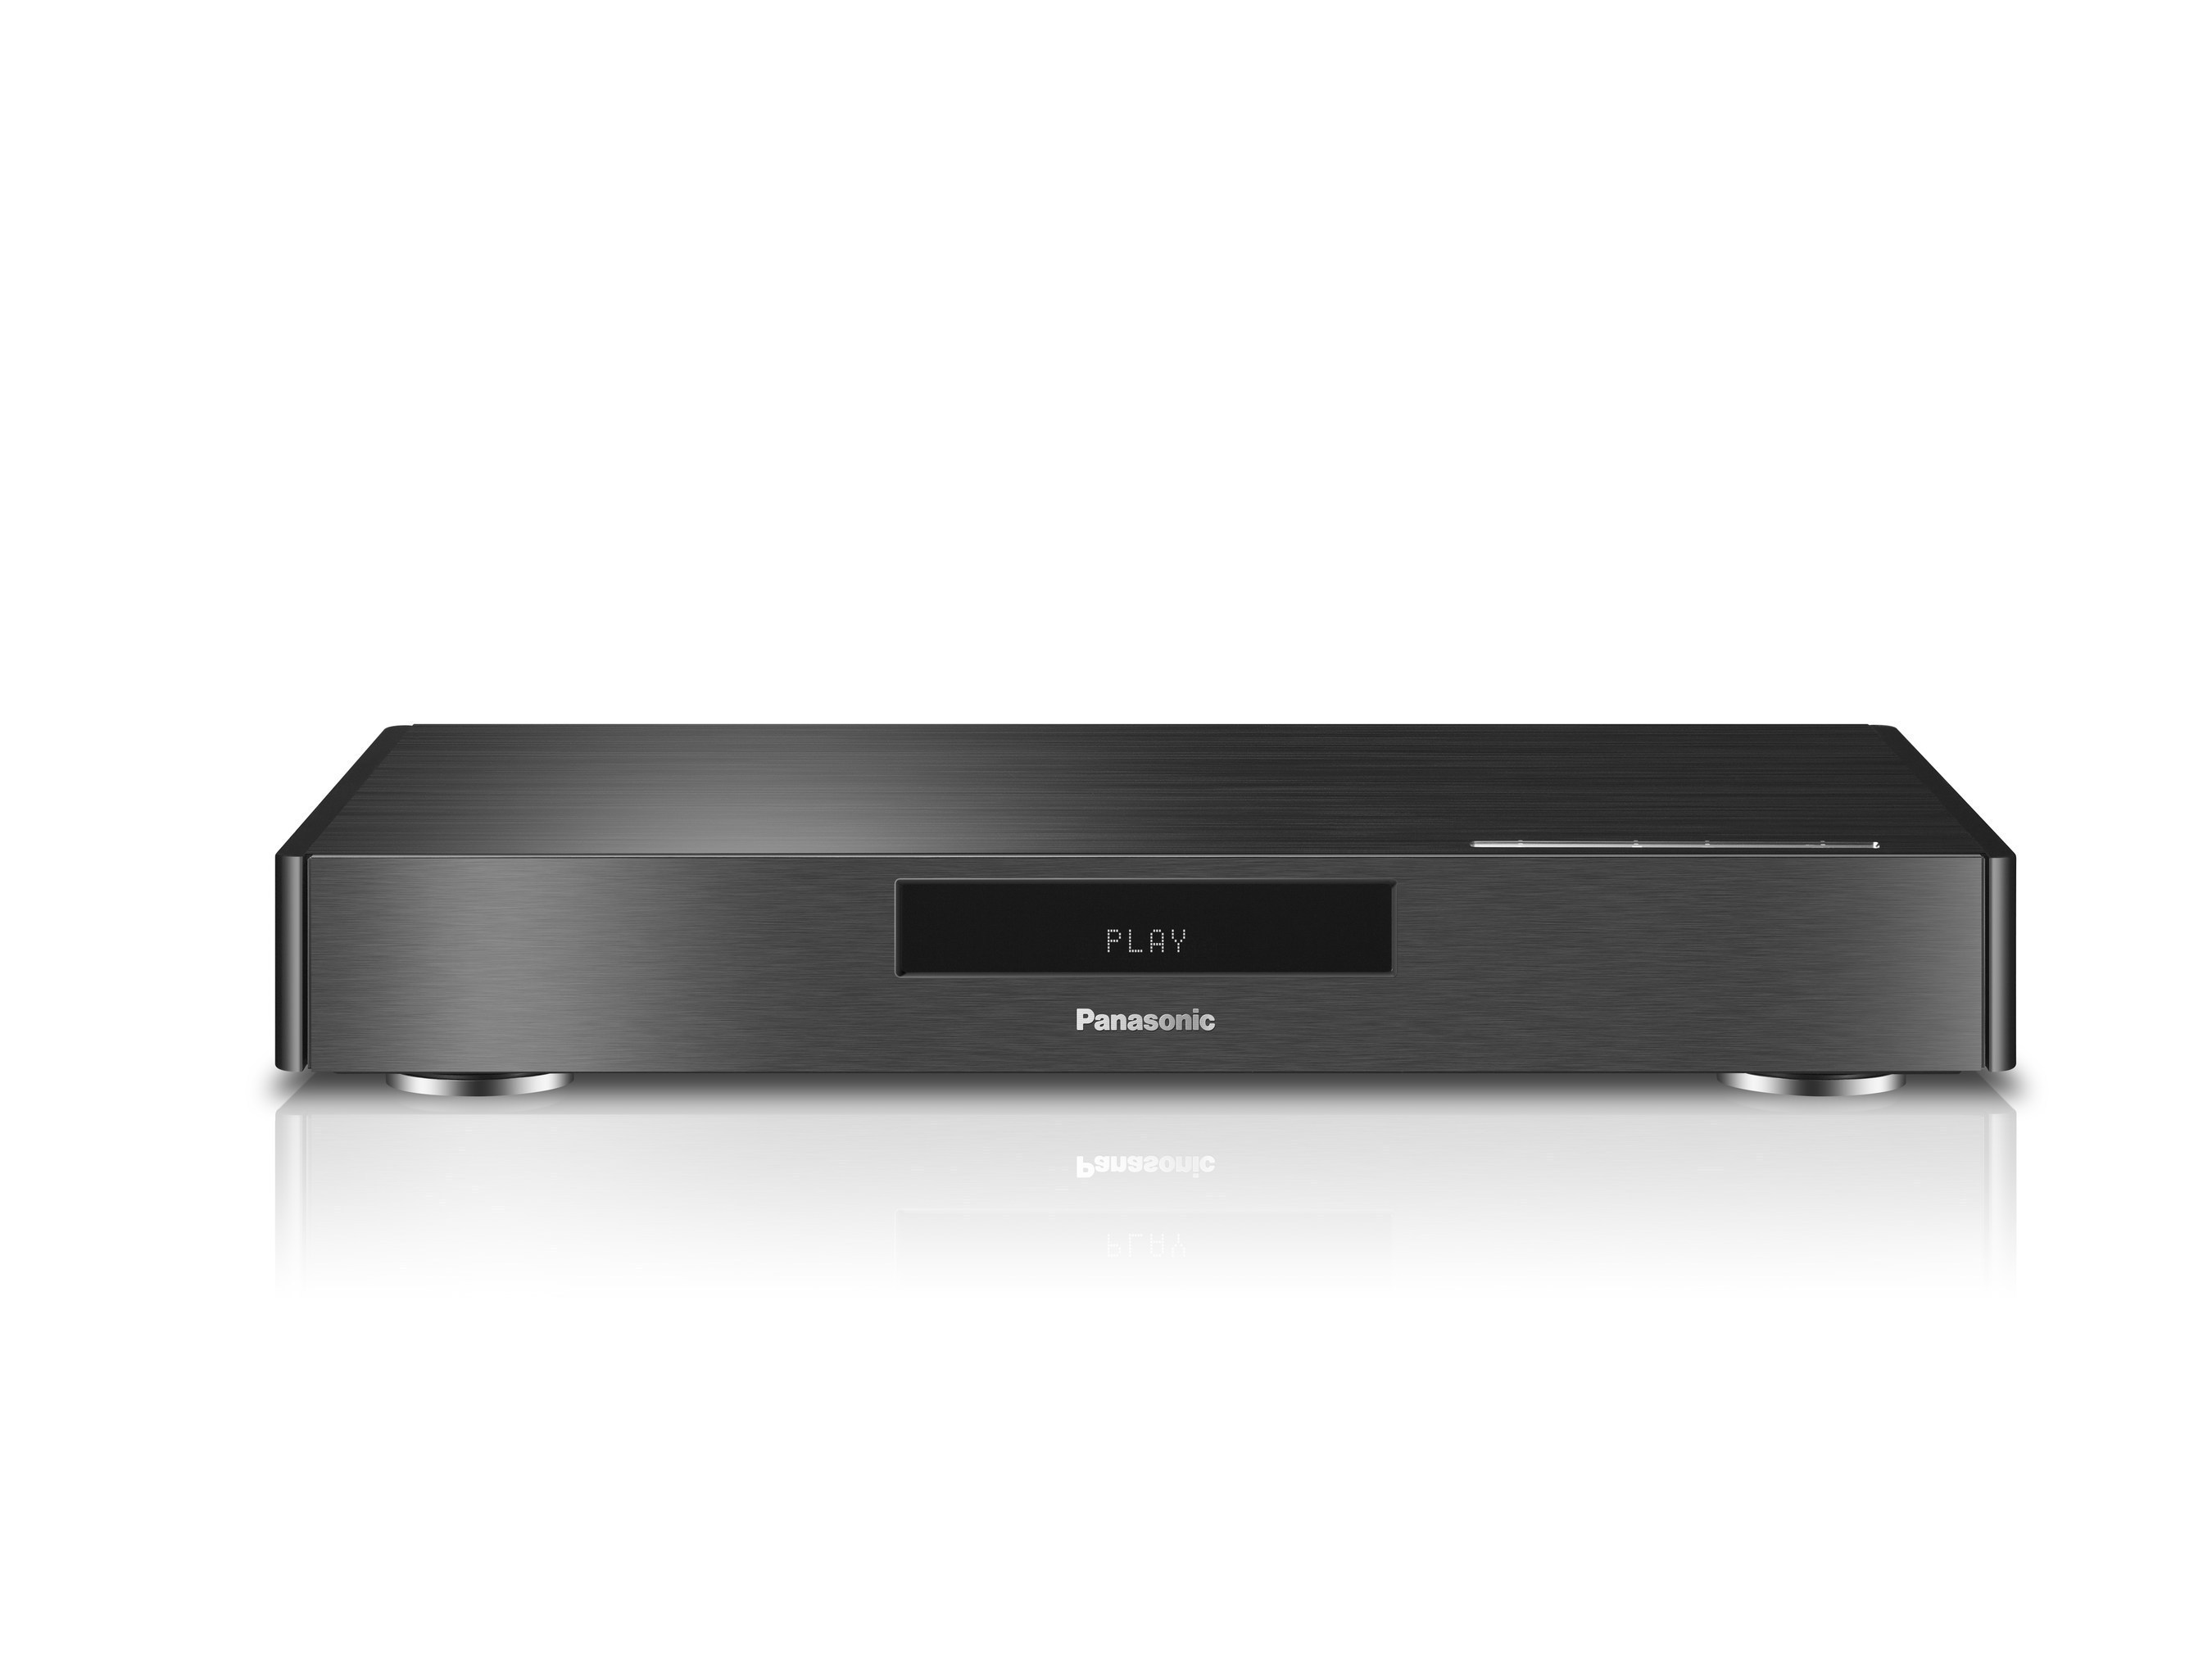 Panasonic Exhibits Prototype of World's First Next Generation Blu-ray Disc Player at CES 2015